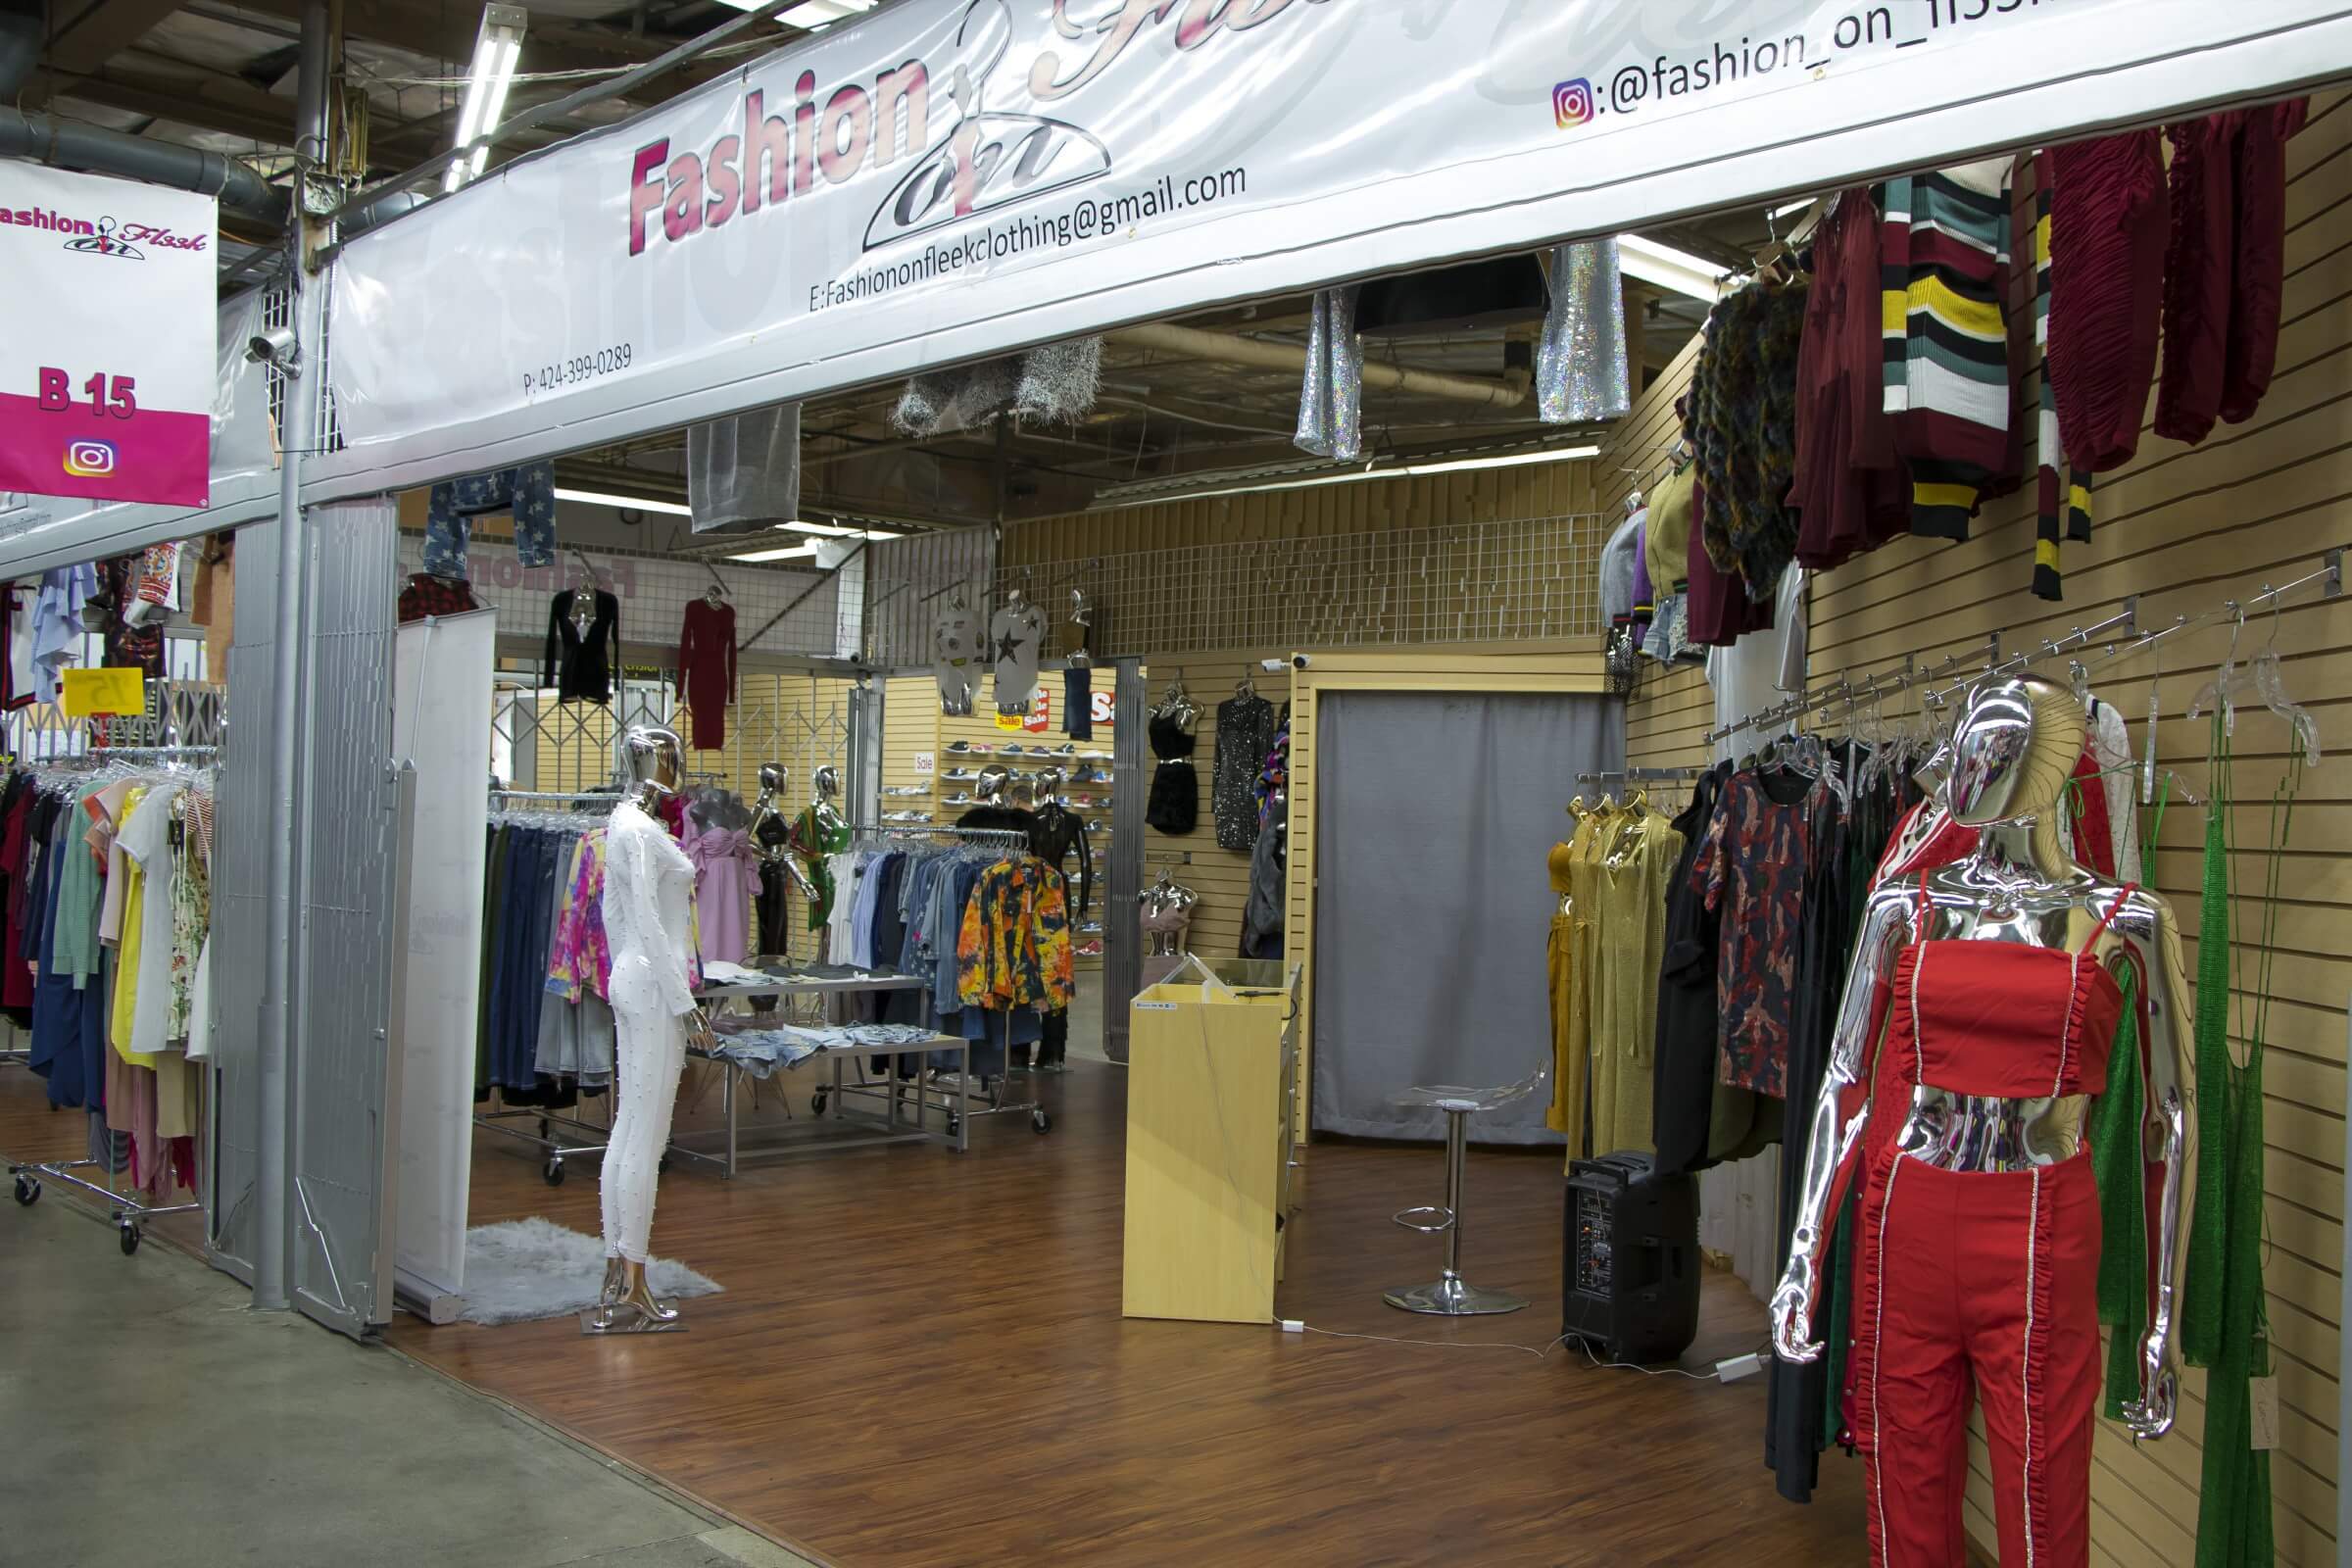 Ladies Clothing Stores in Los Angeles - Slauson Super Mall